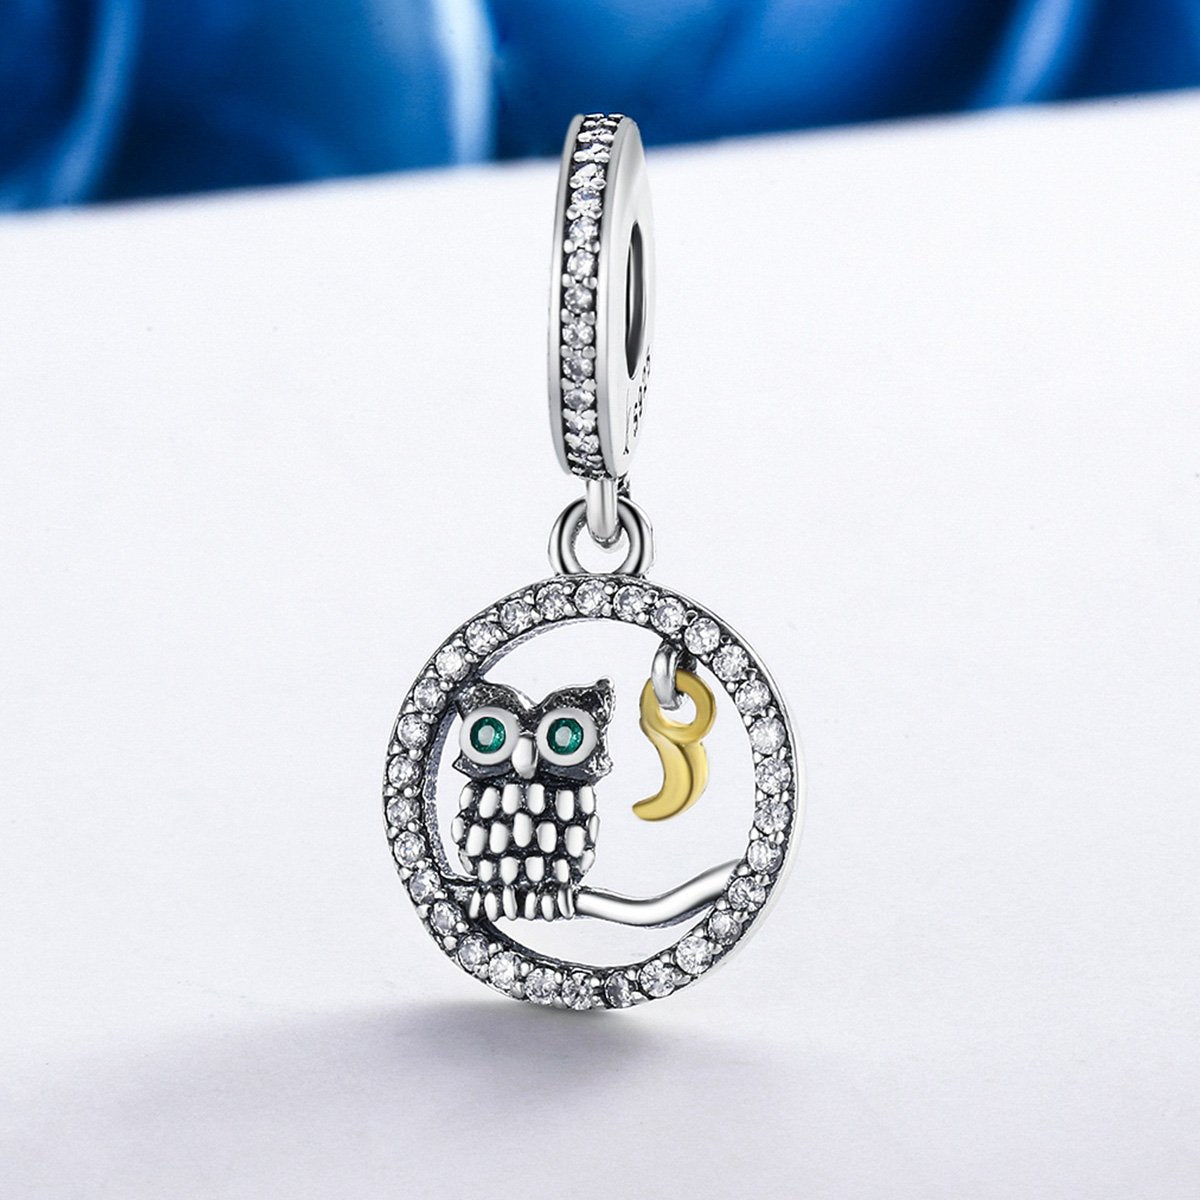 Sterling 925 silver charm the owl in cage puls bead pendant fits Pandora charm and European charm bracelet Xaxe.com